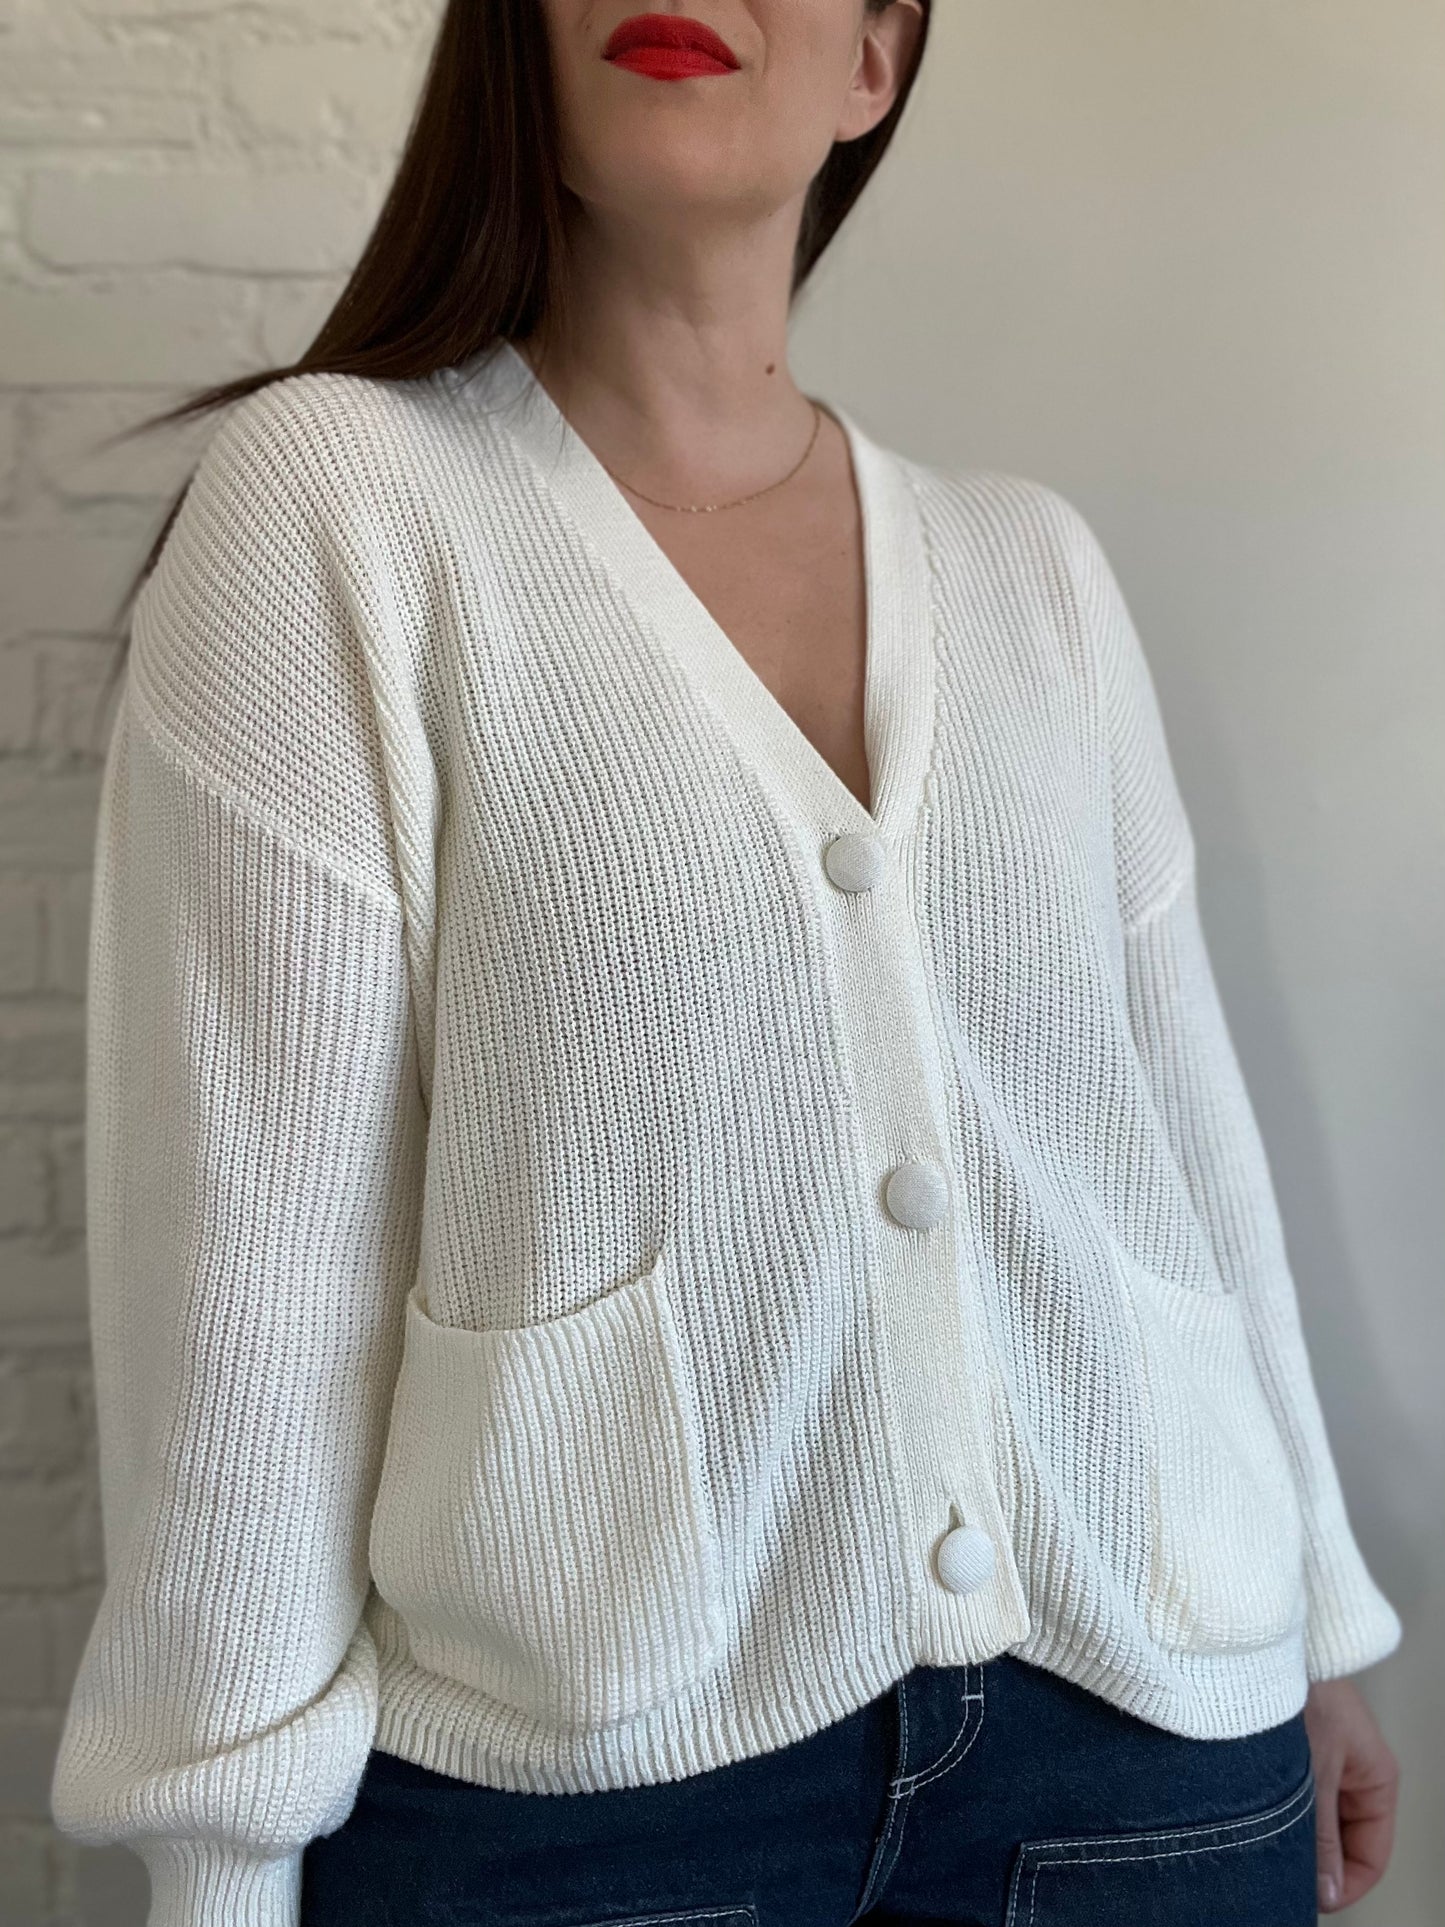 Relaxed White Knit Cardigan - XL